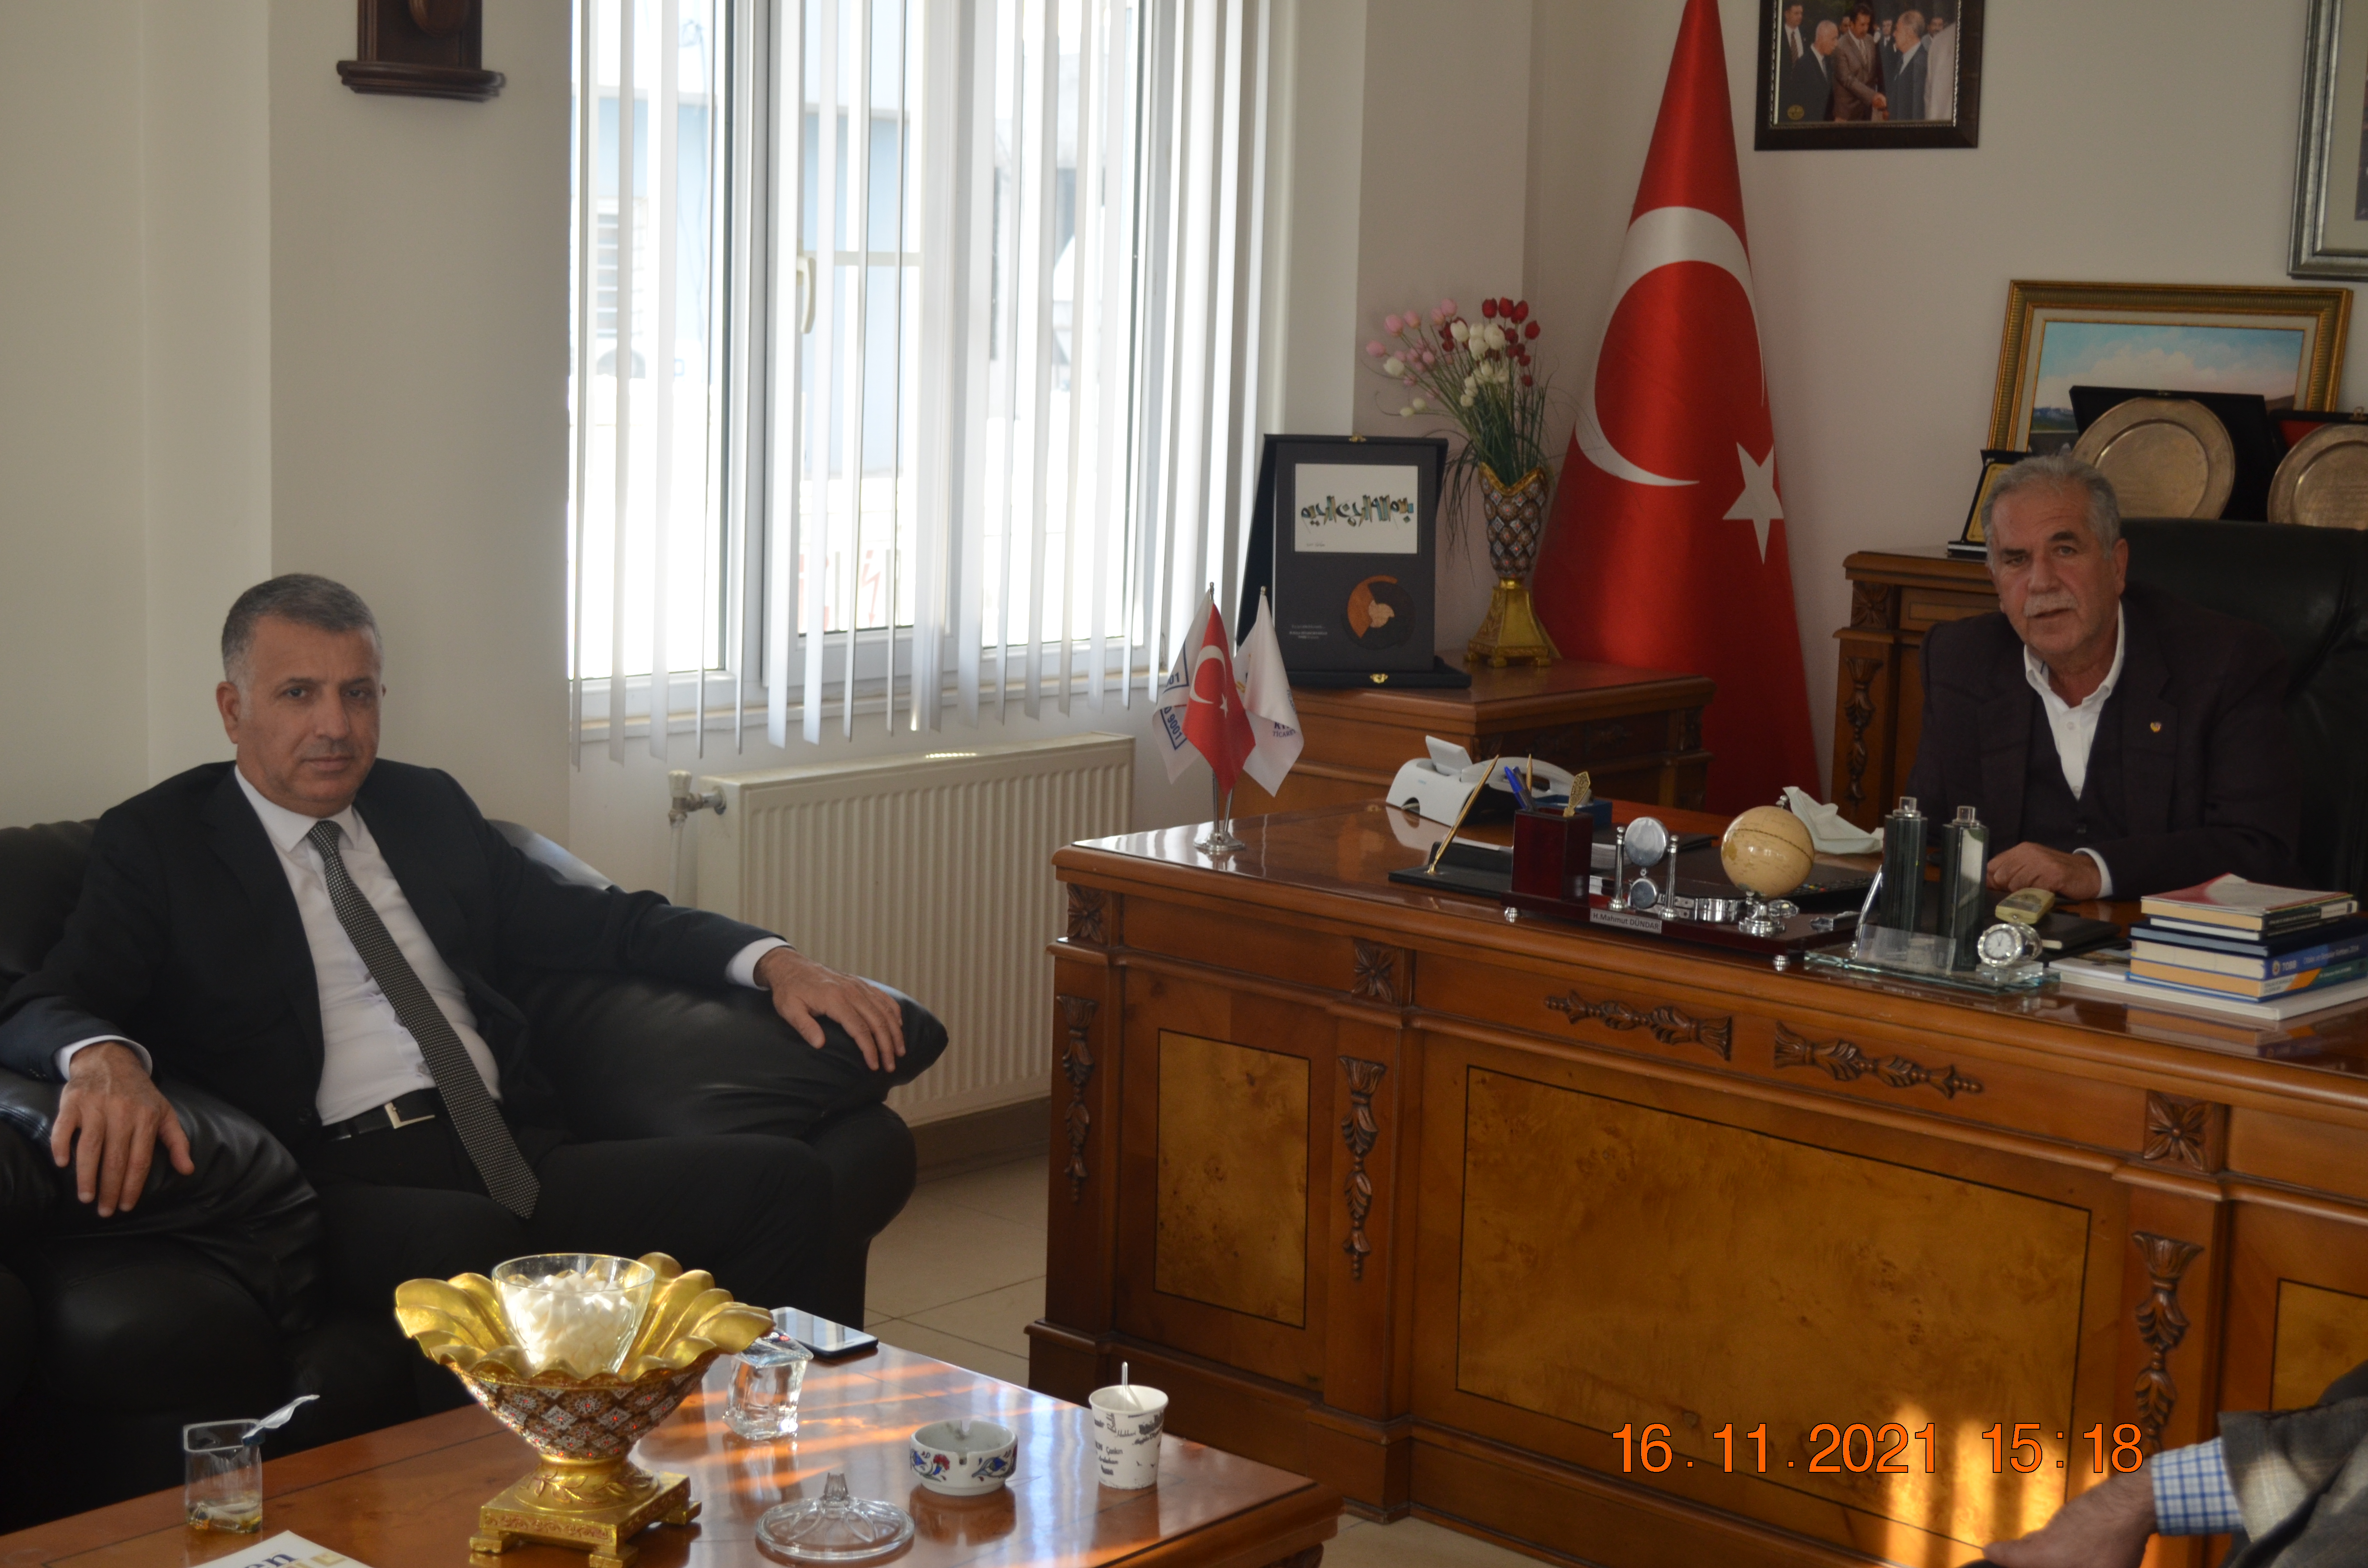 A Visit to Our Chamber from the Ministry of Food, Agriculture and Livestock Kızıltepe District Manager